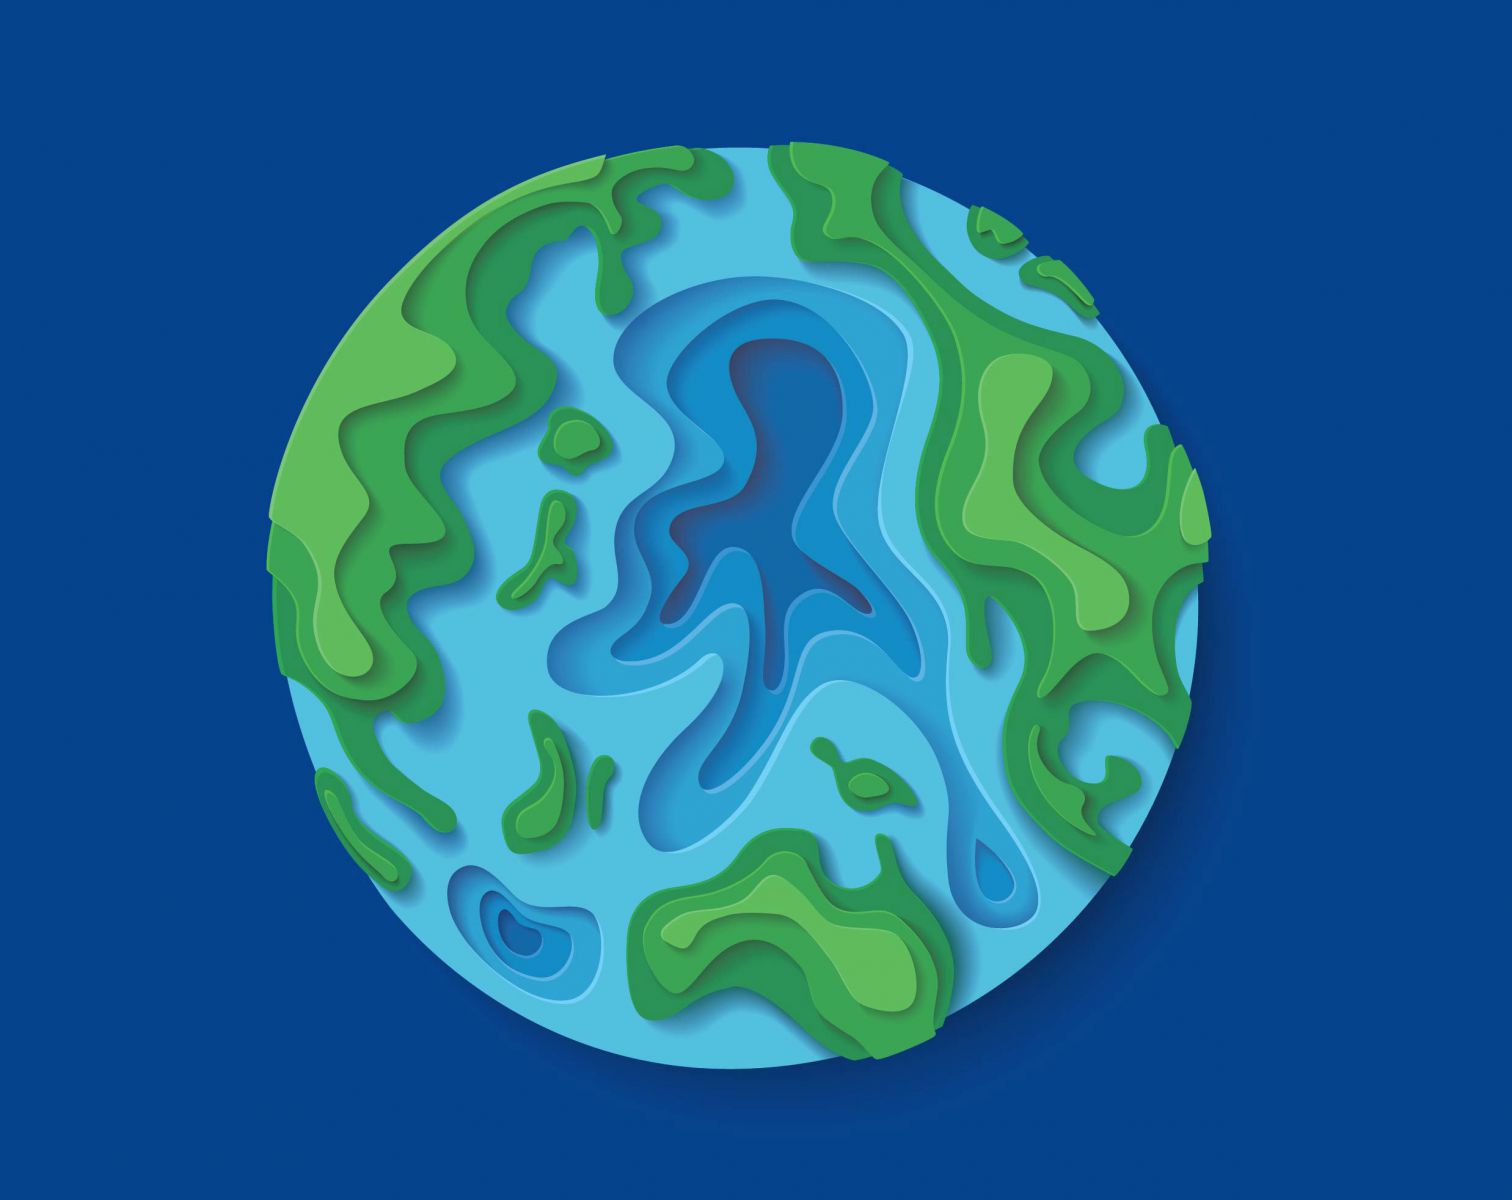 Paper cut-out style illustration of the Earth